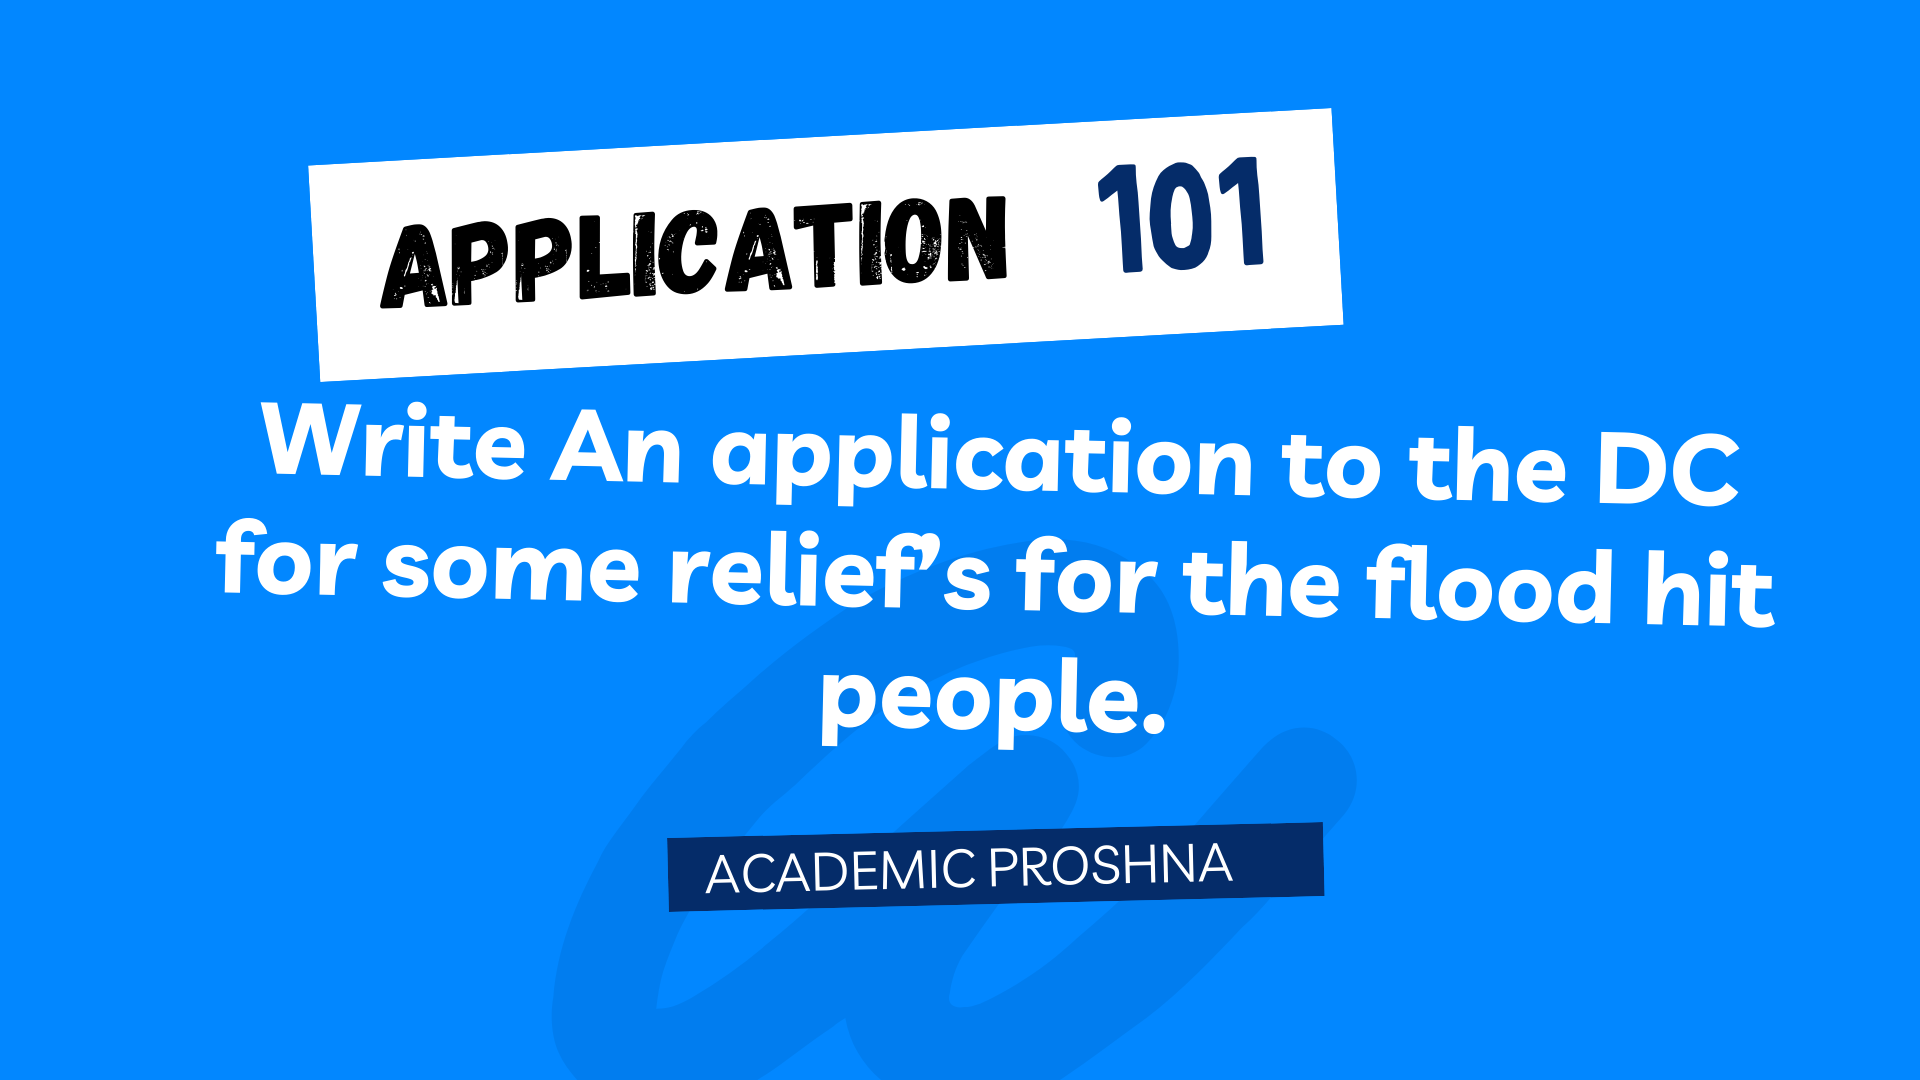 An application for relief for the flood affected people.